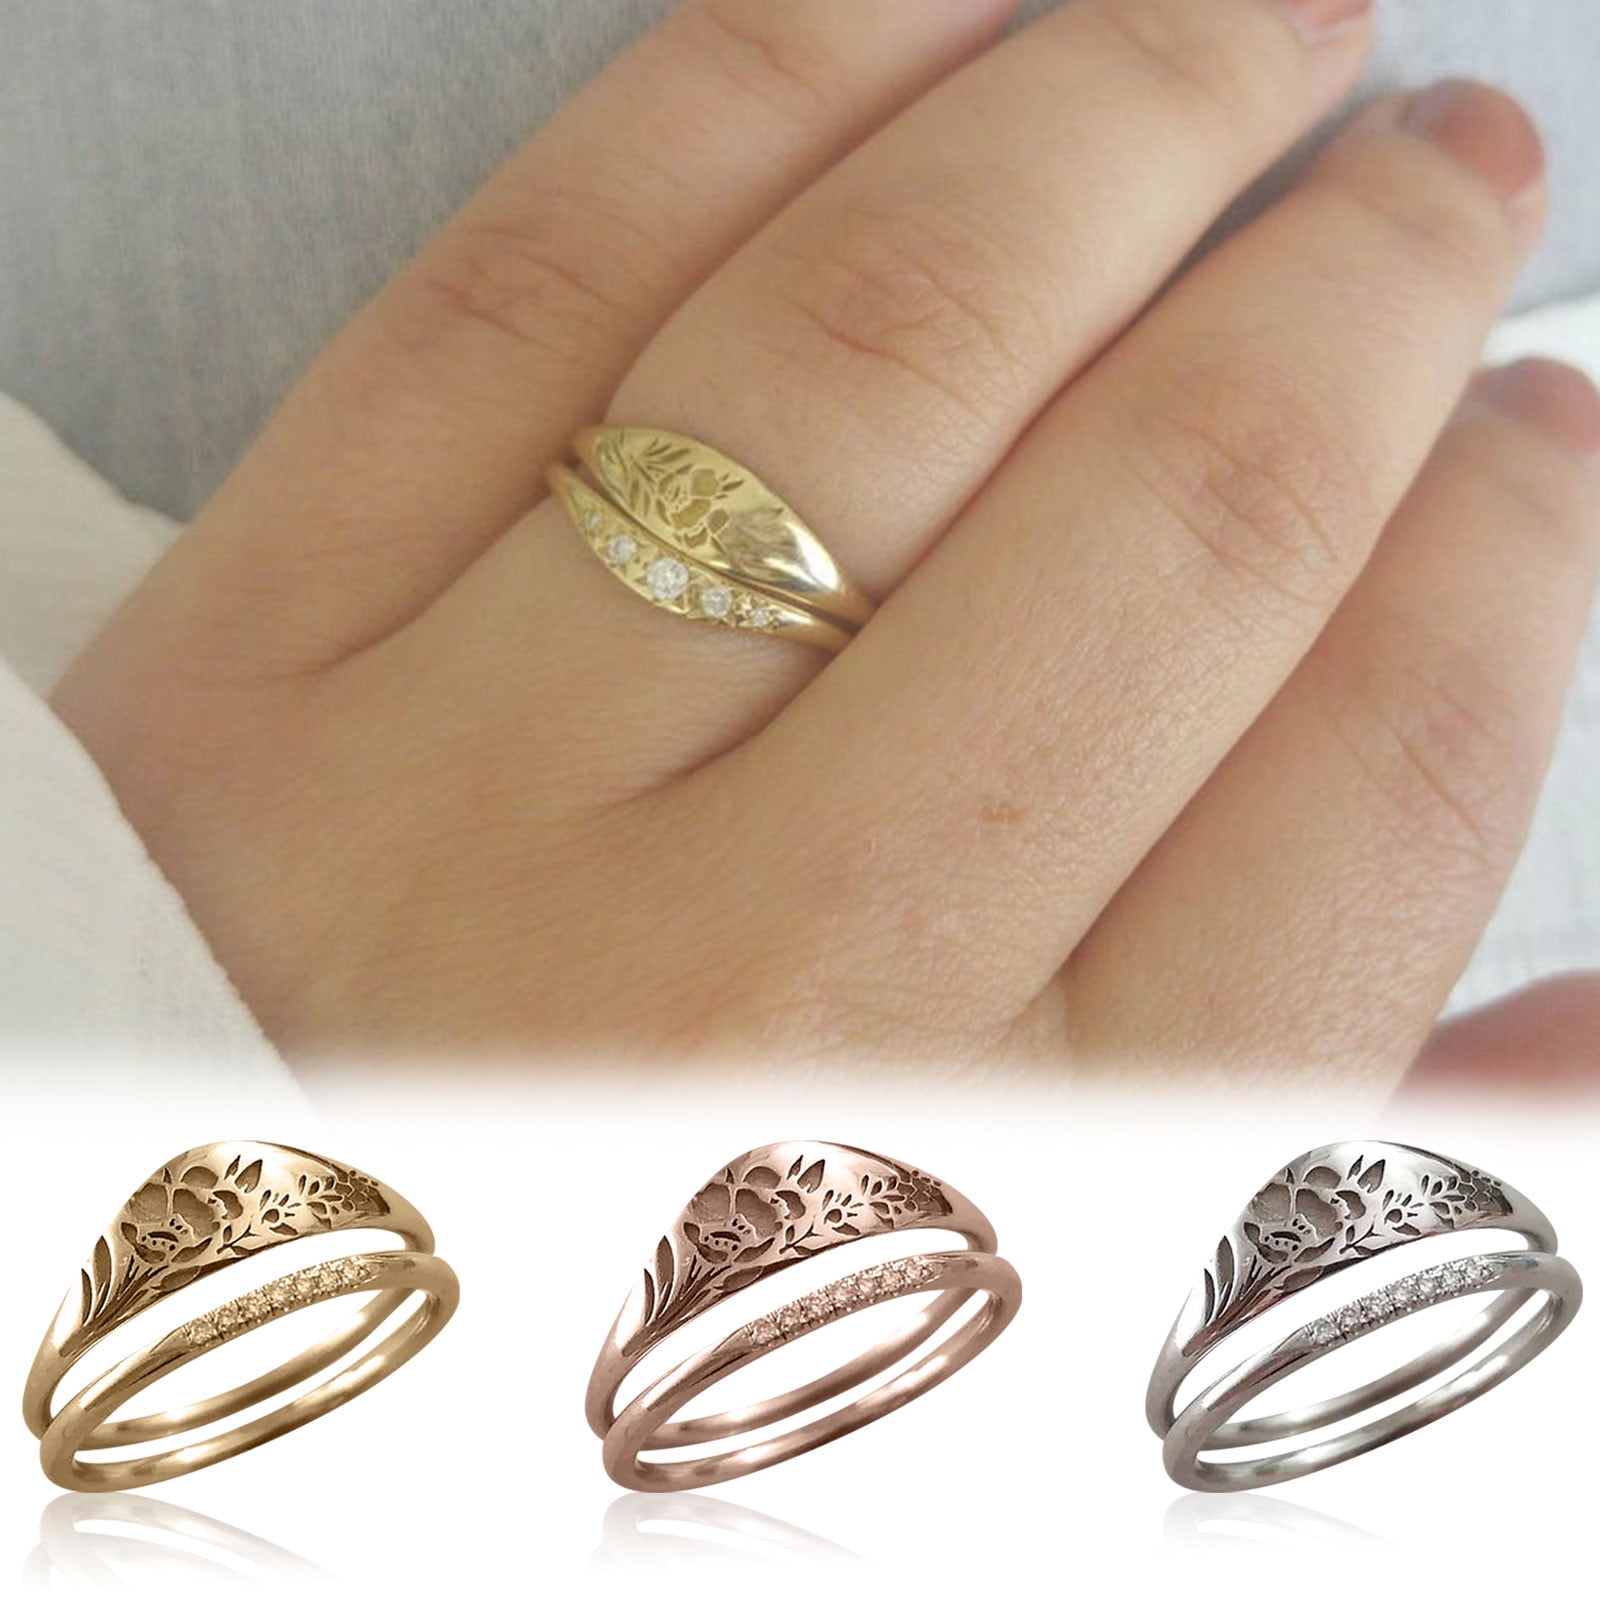 pure gold ring 357000 0767137877 delivery free HADI MKOANI | Instagram